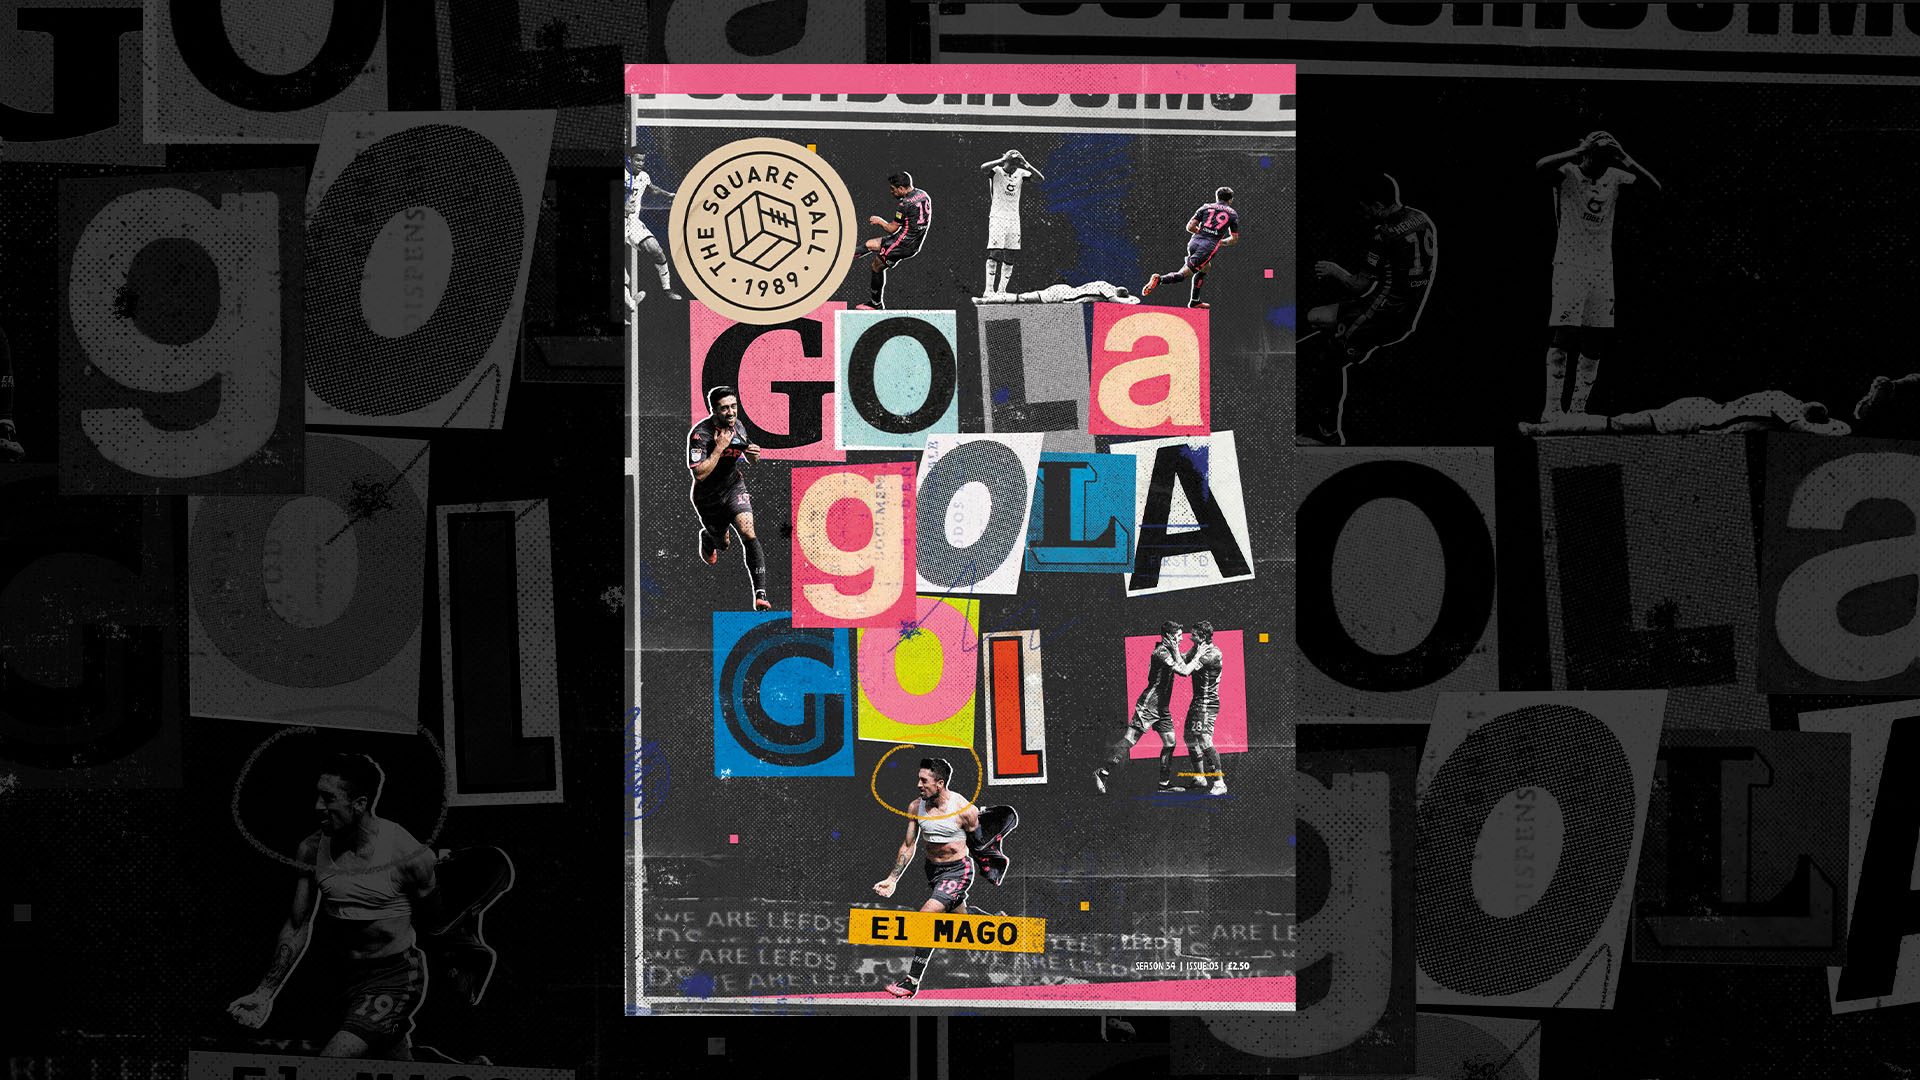 The cover of TSB 23-24 issue 3, celebrating Pablo's winner against Swansea with lettering to say 'Gola gola gol' and cutout pictures of Pablo scoring and celebrating